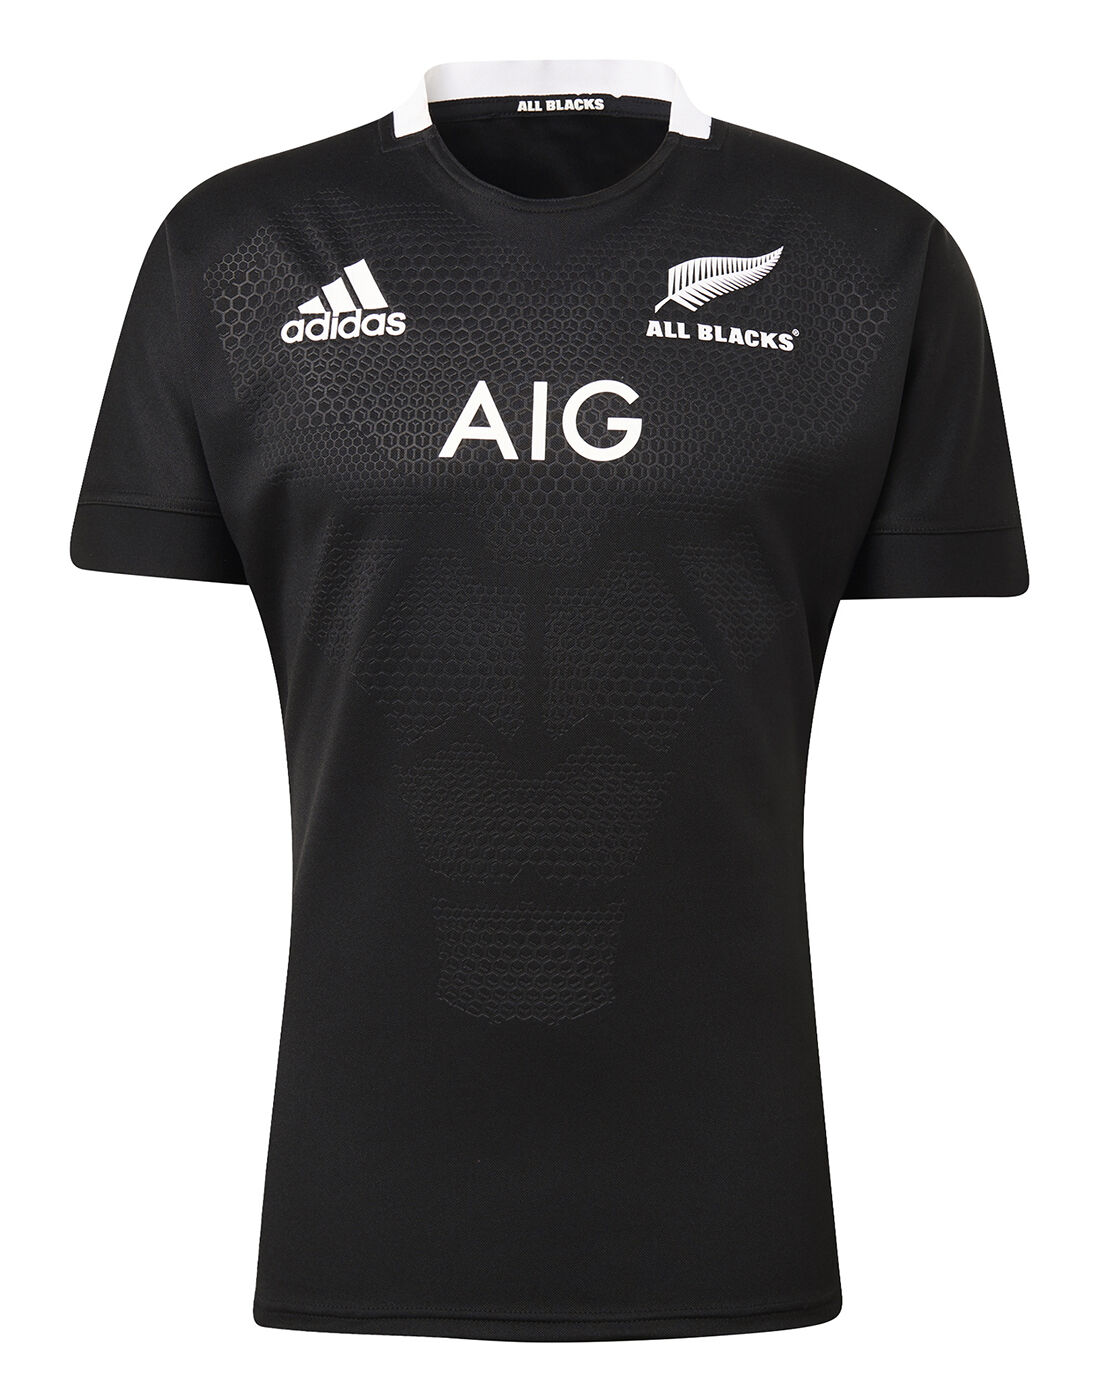 All Blacks Home Rugby Jersey 2019/20 